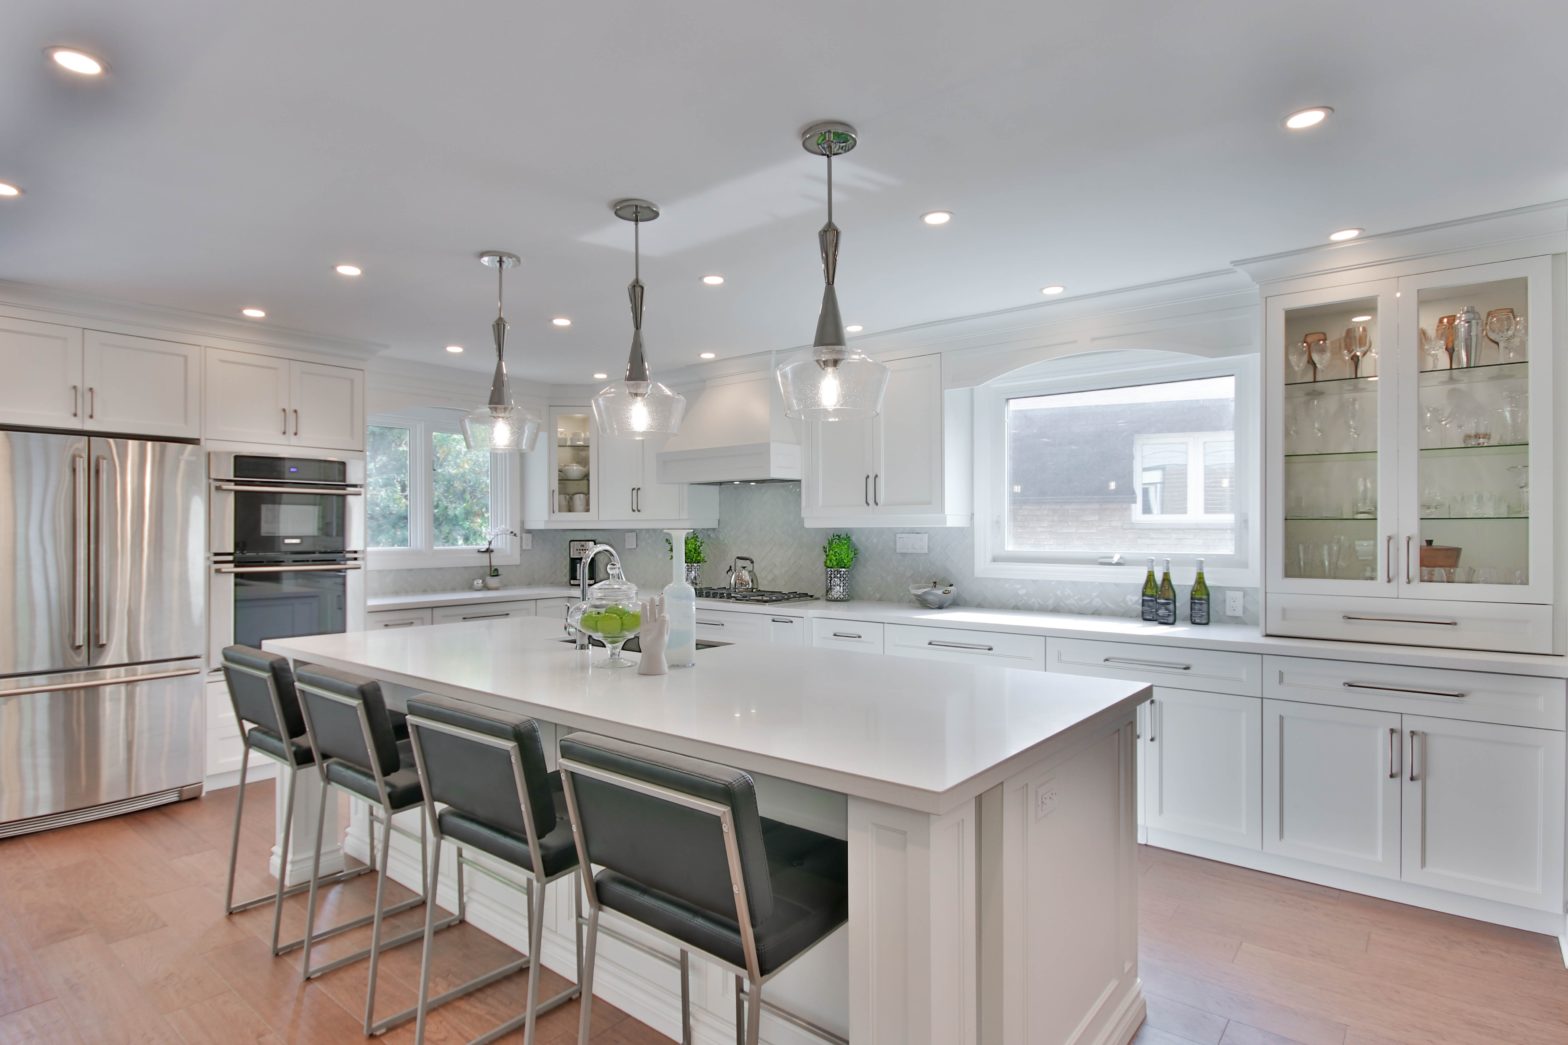 Custom Cabinets Are Generally More Expensive Than Store-Bought Cookie-Cutter Kitchen Cabinets.